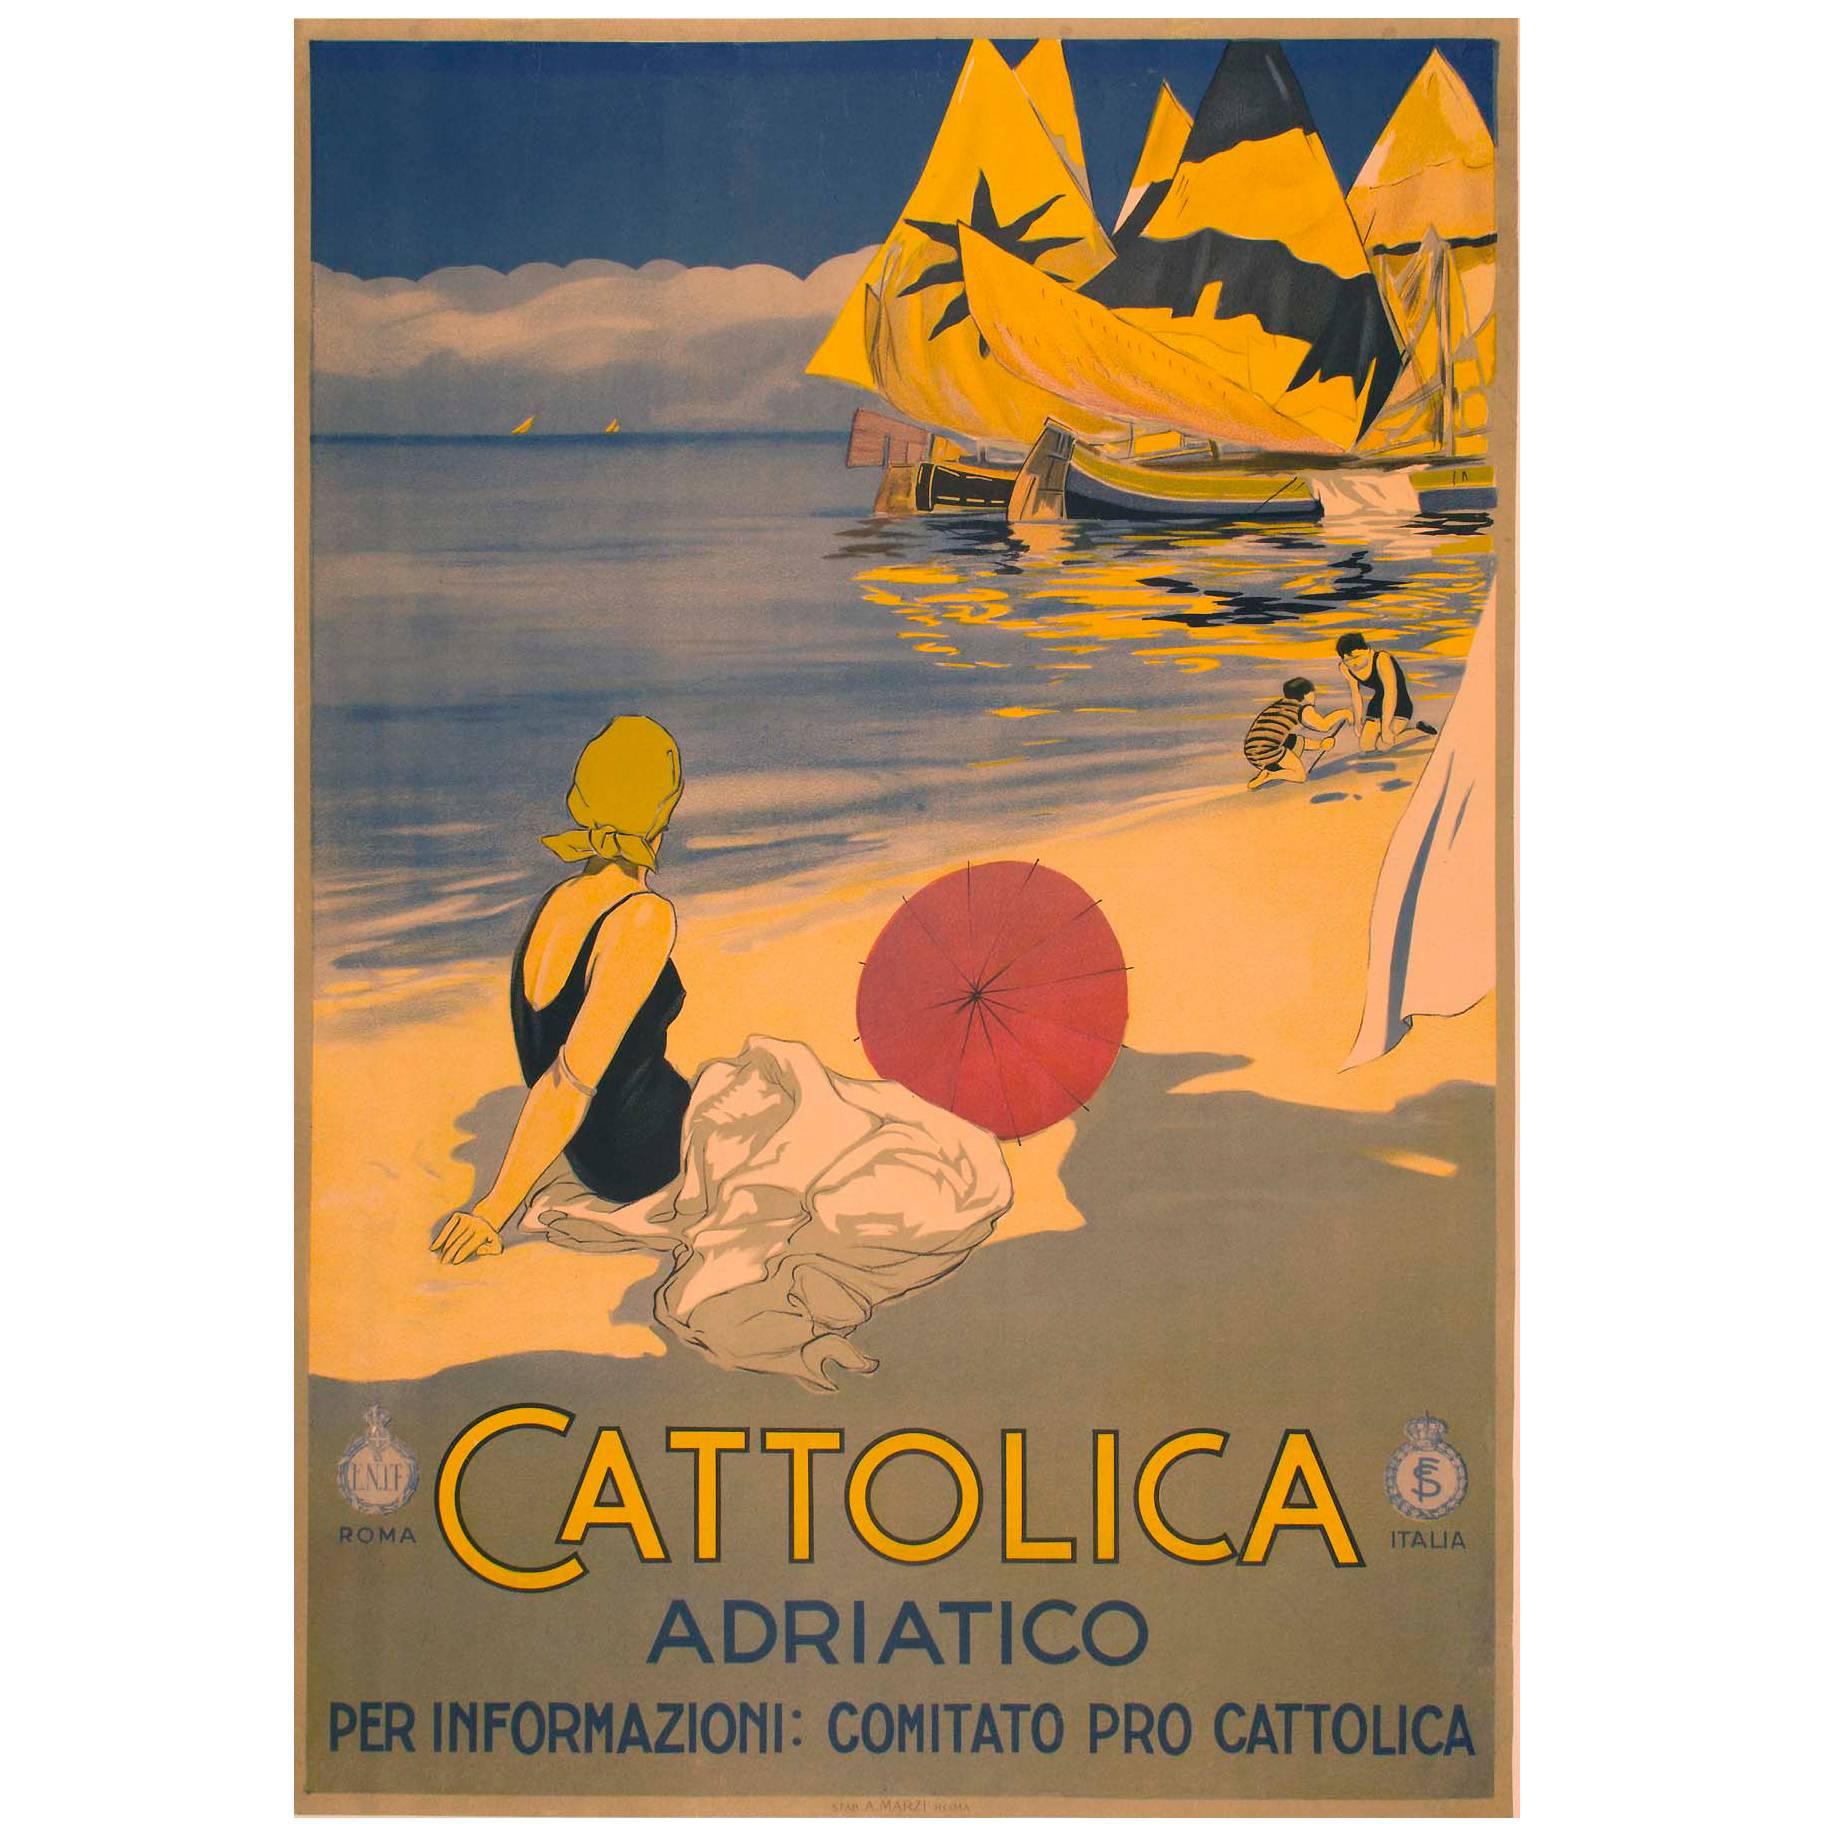 Travel Poster for Cattolica Italy